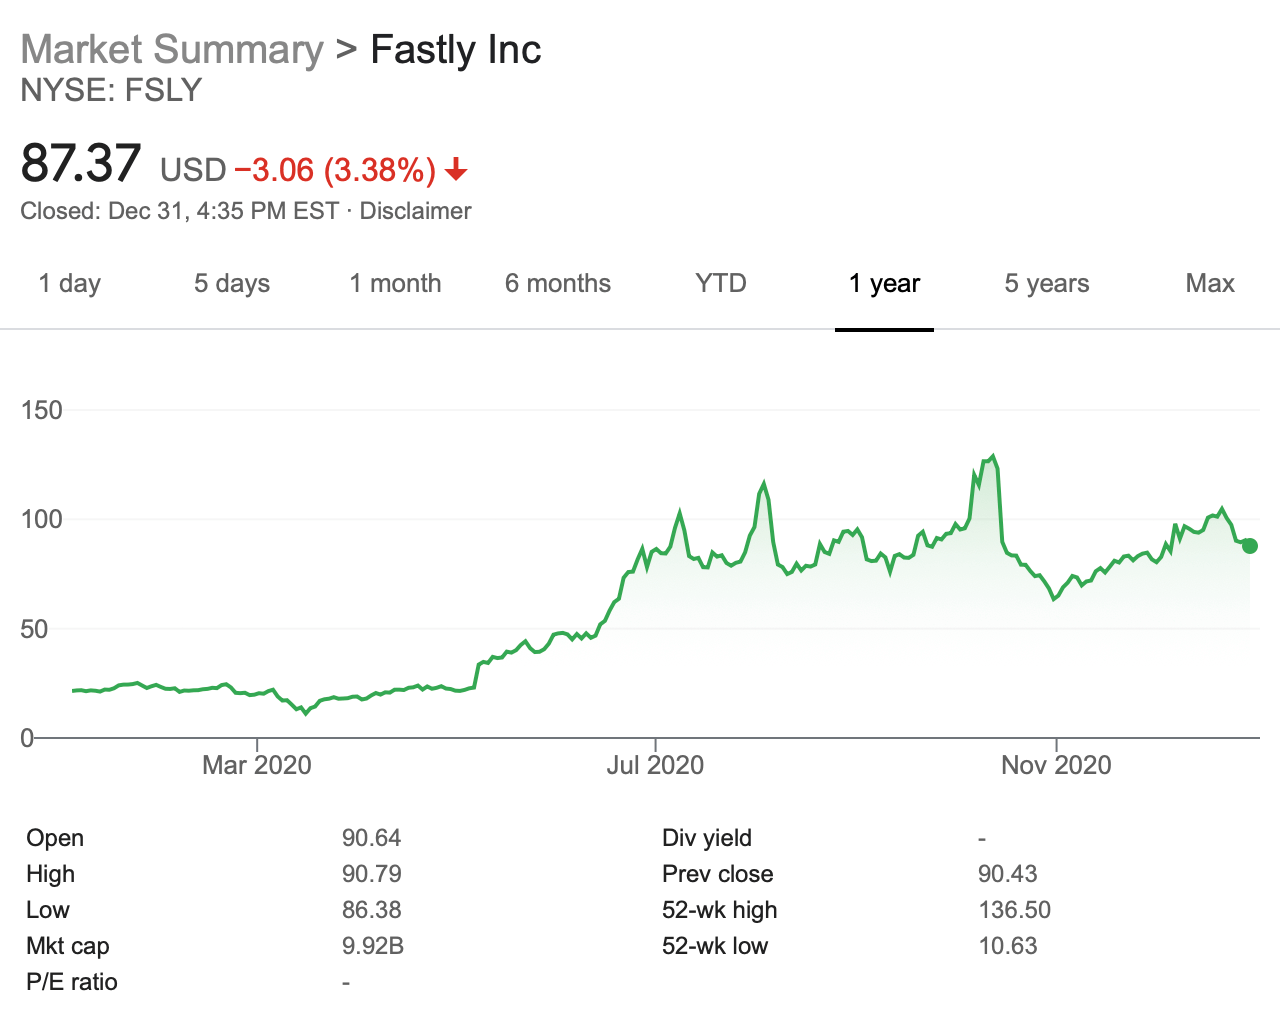 Fastly (FSLY) 2020 stock performance chart